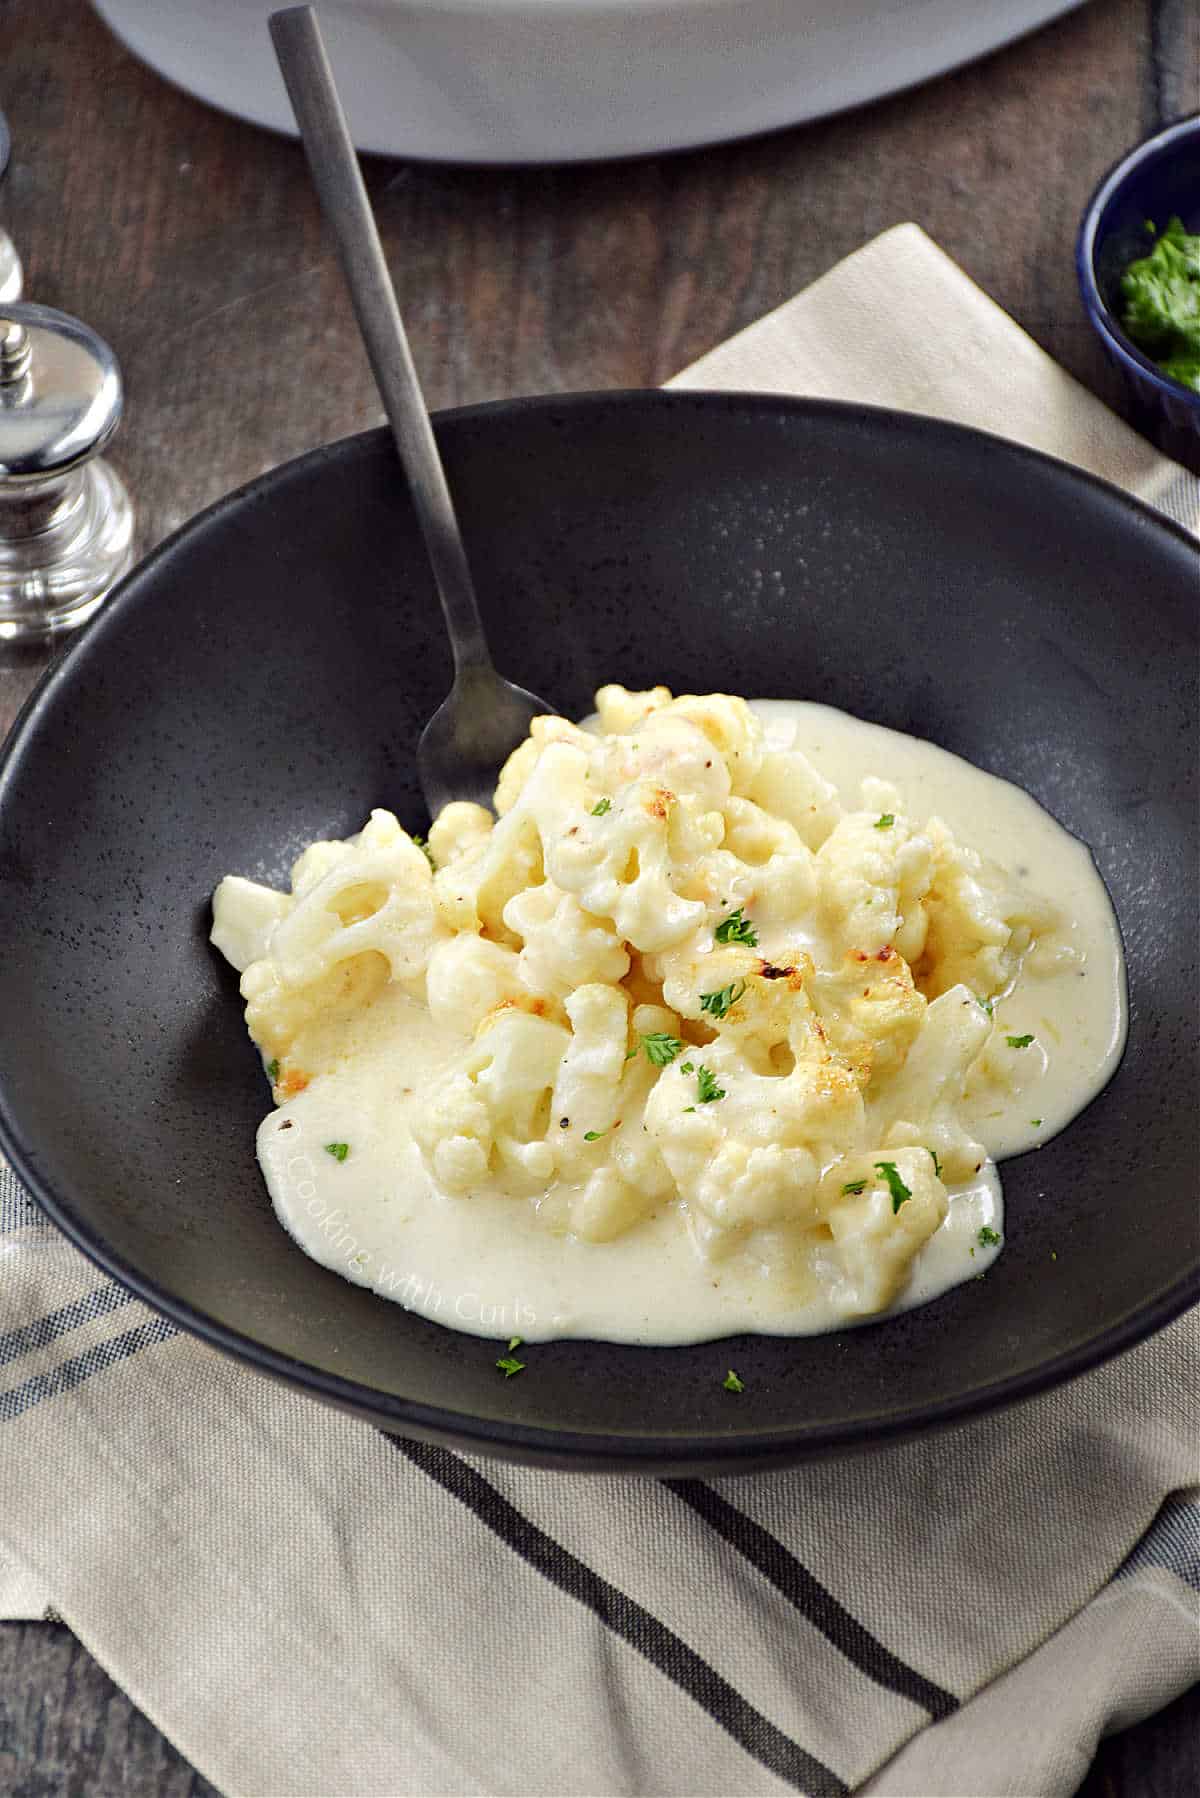 Cauliflower pieces topped with a creamy cheese sauce in a bowl with a fork poking in on the right side.